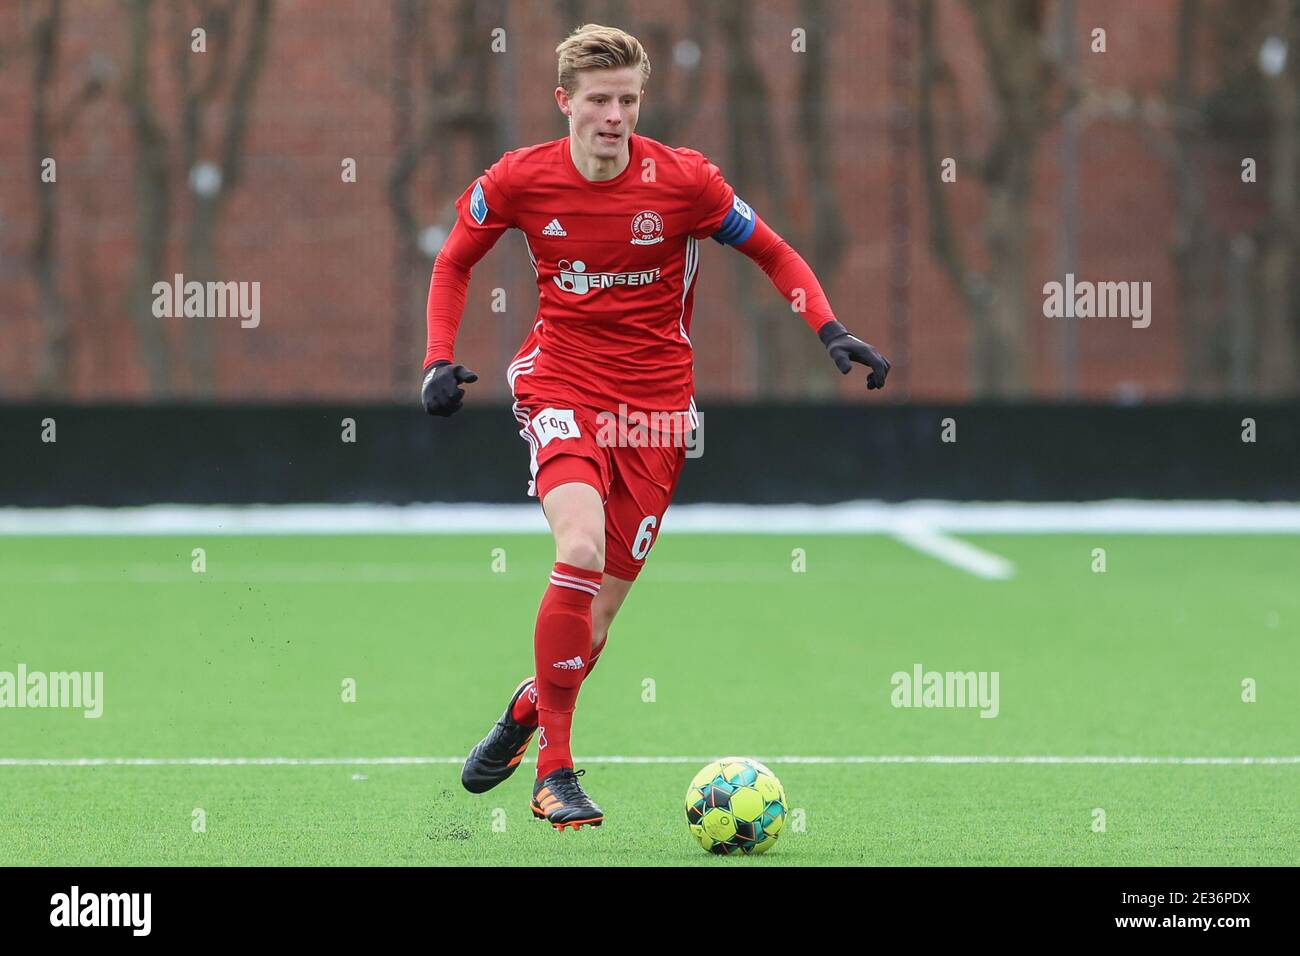 Kongens Lyngby, Denmark. 16th Jan, 2021. Frederik Winther (6) of Lyngby Boldklub seen during the test match between Lyngby Boldklub and Hellerup IK in Kongens Lyngby. (Photo Credit: Gonzales Photo/Alamy Live News Stock Photo